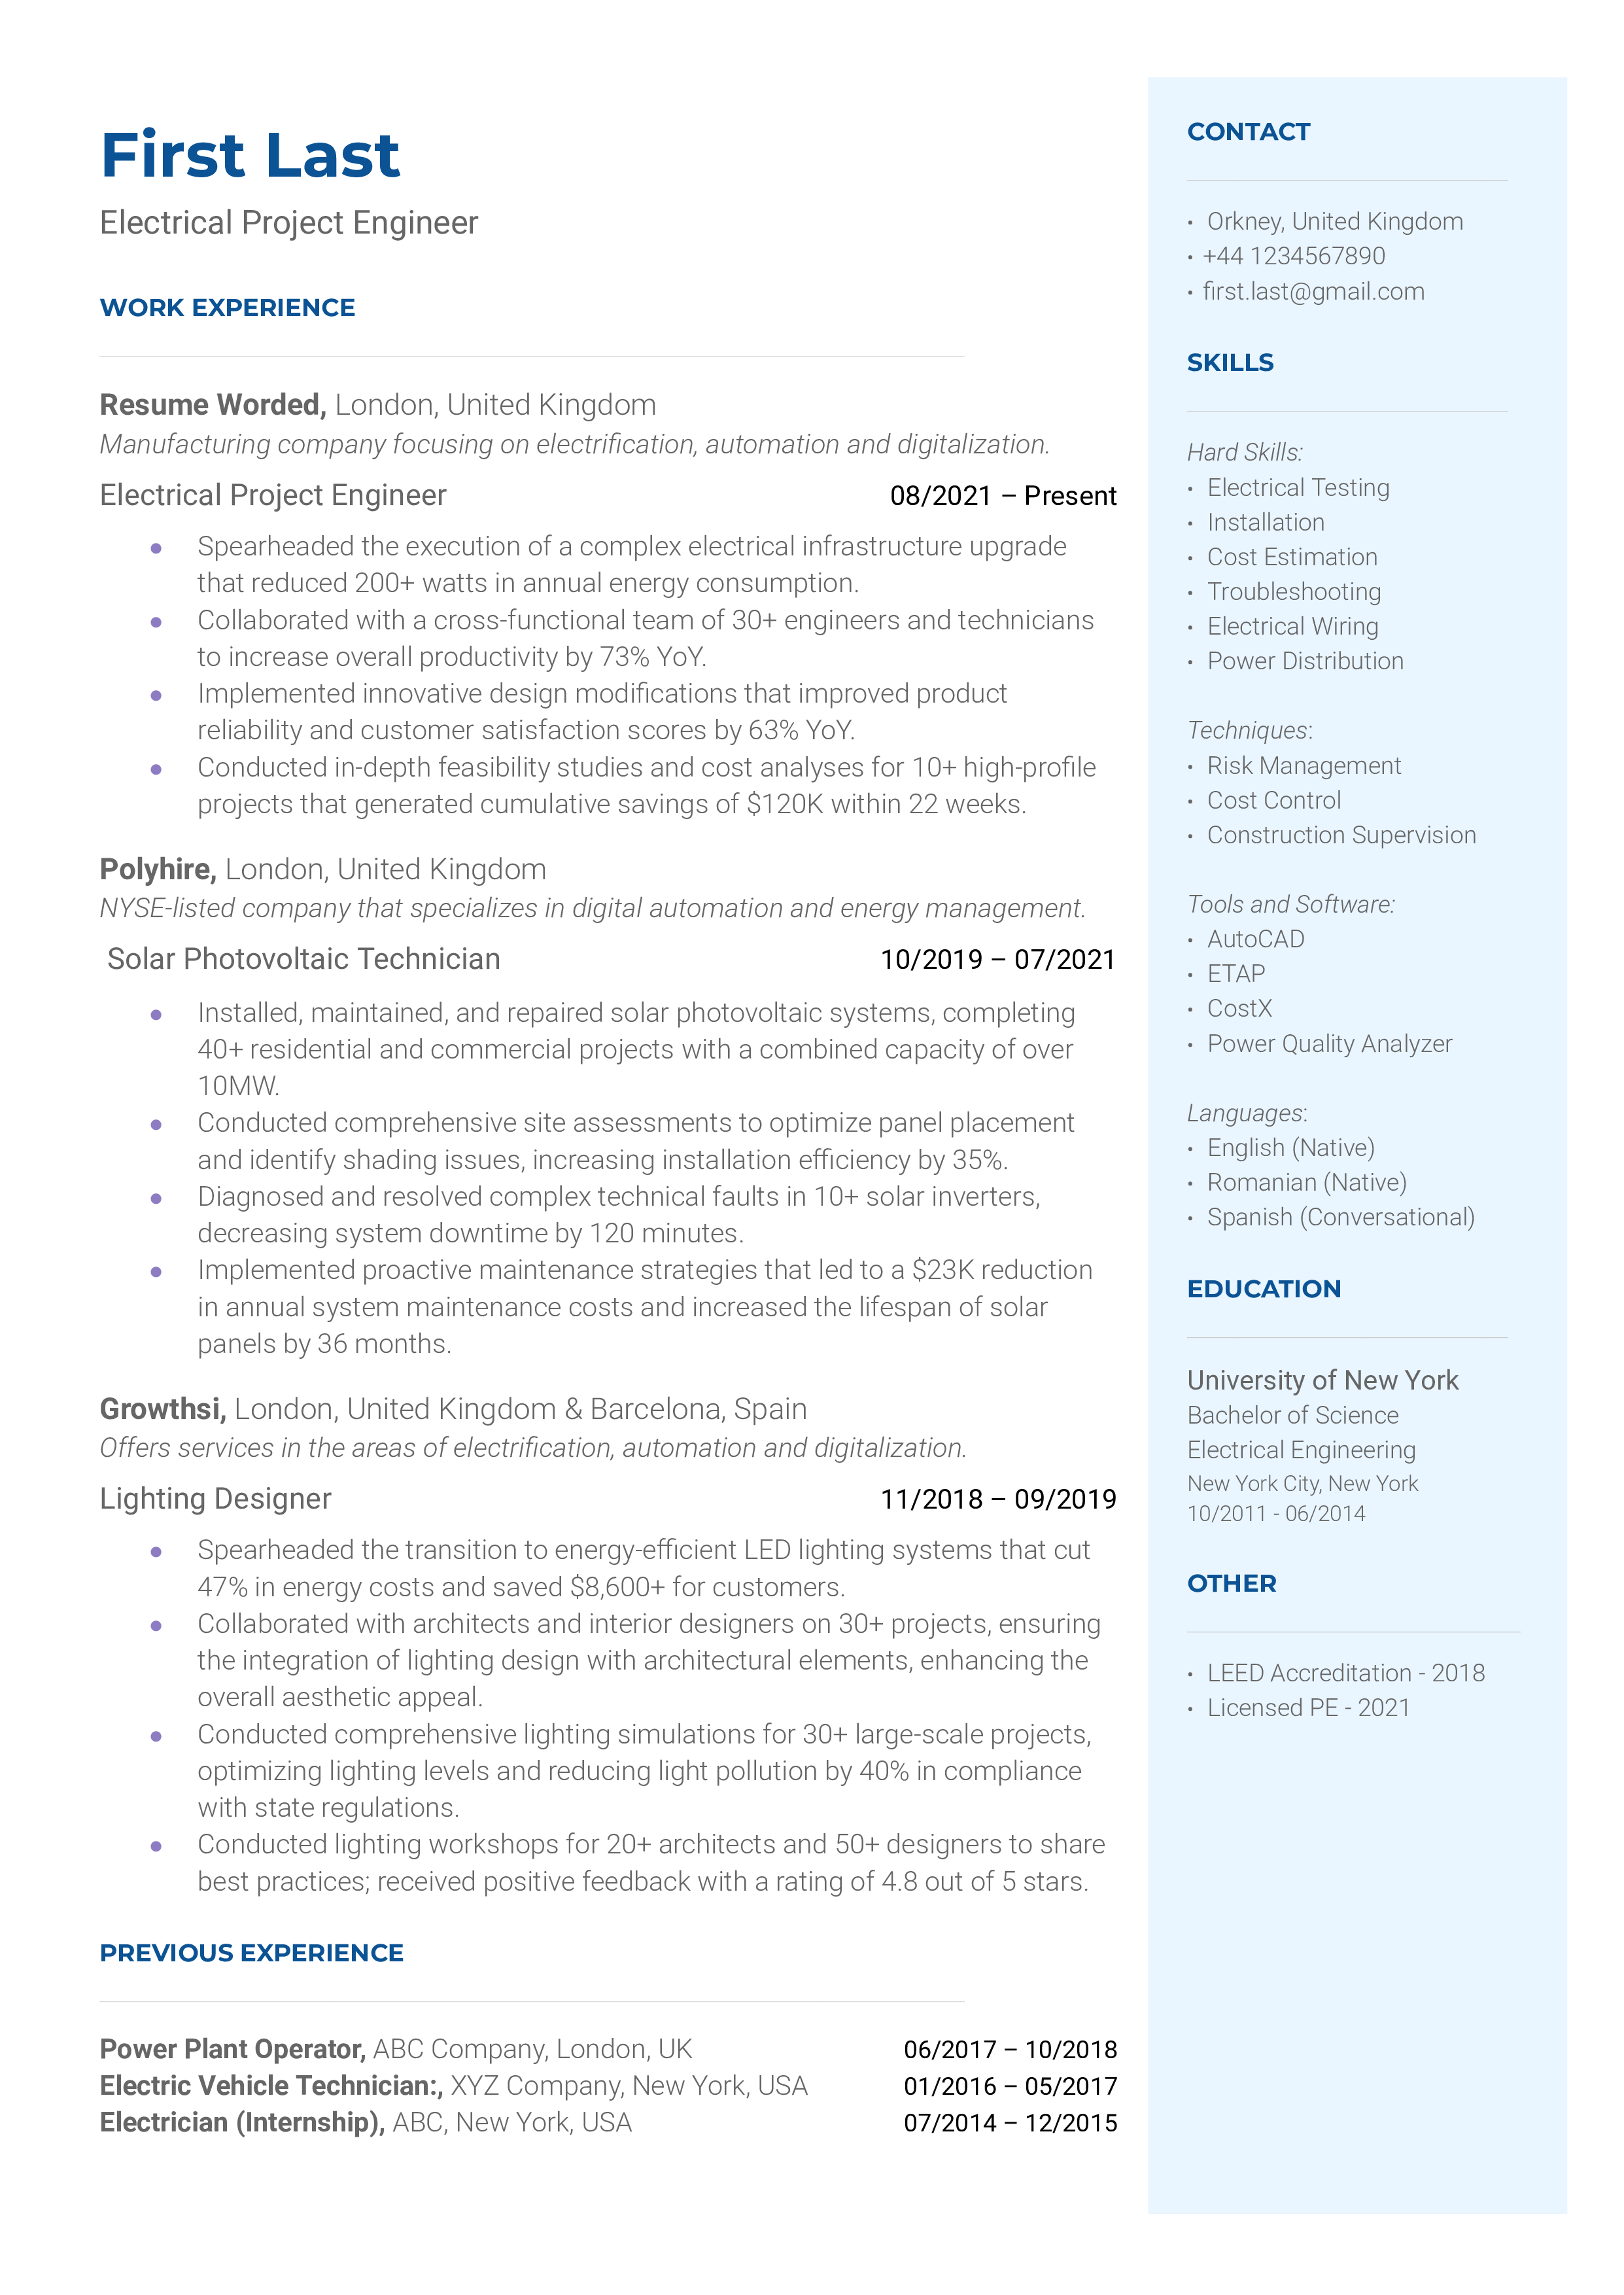 A well-structured CV for an Electrical Project Engineer role.